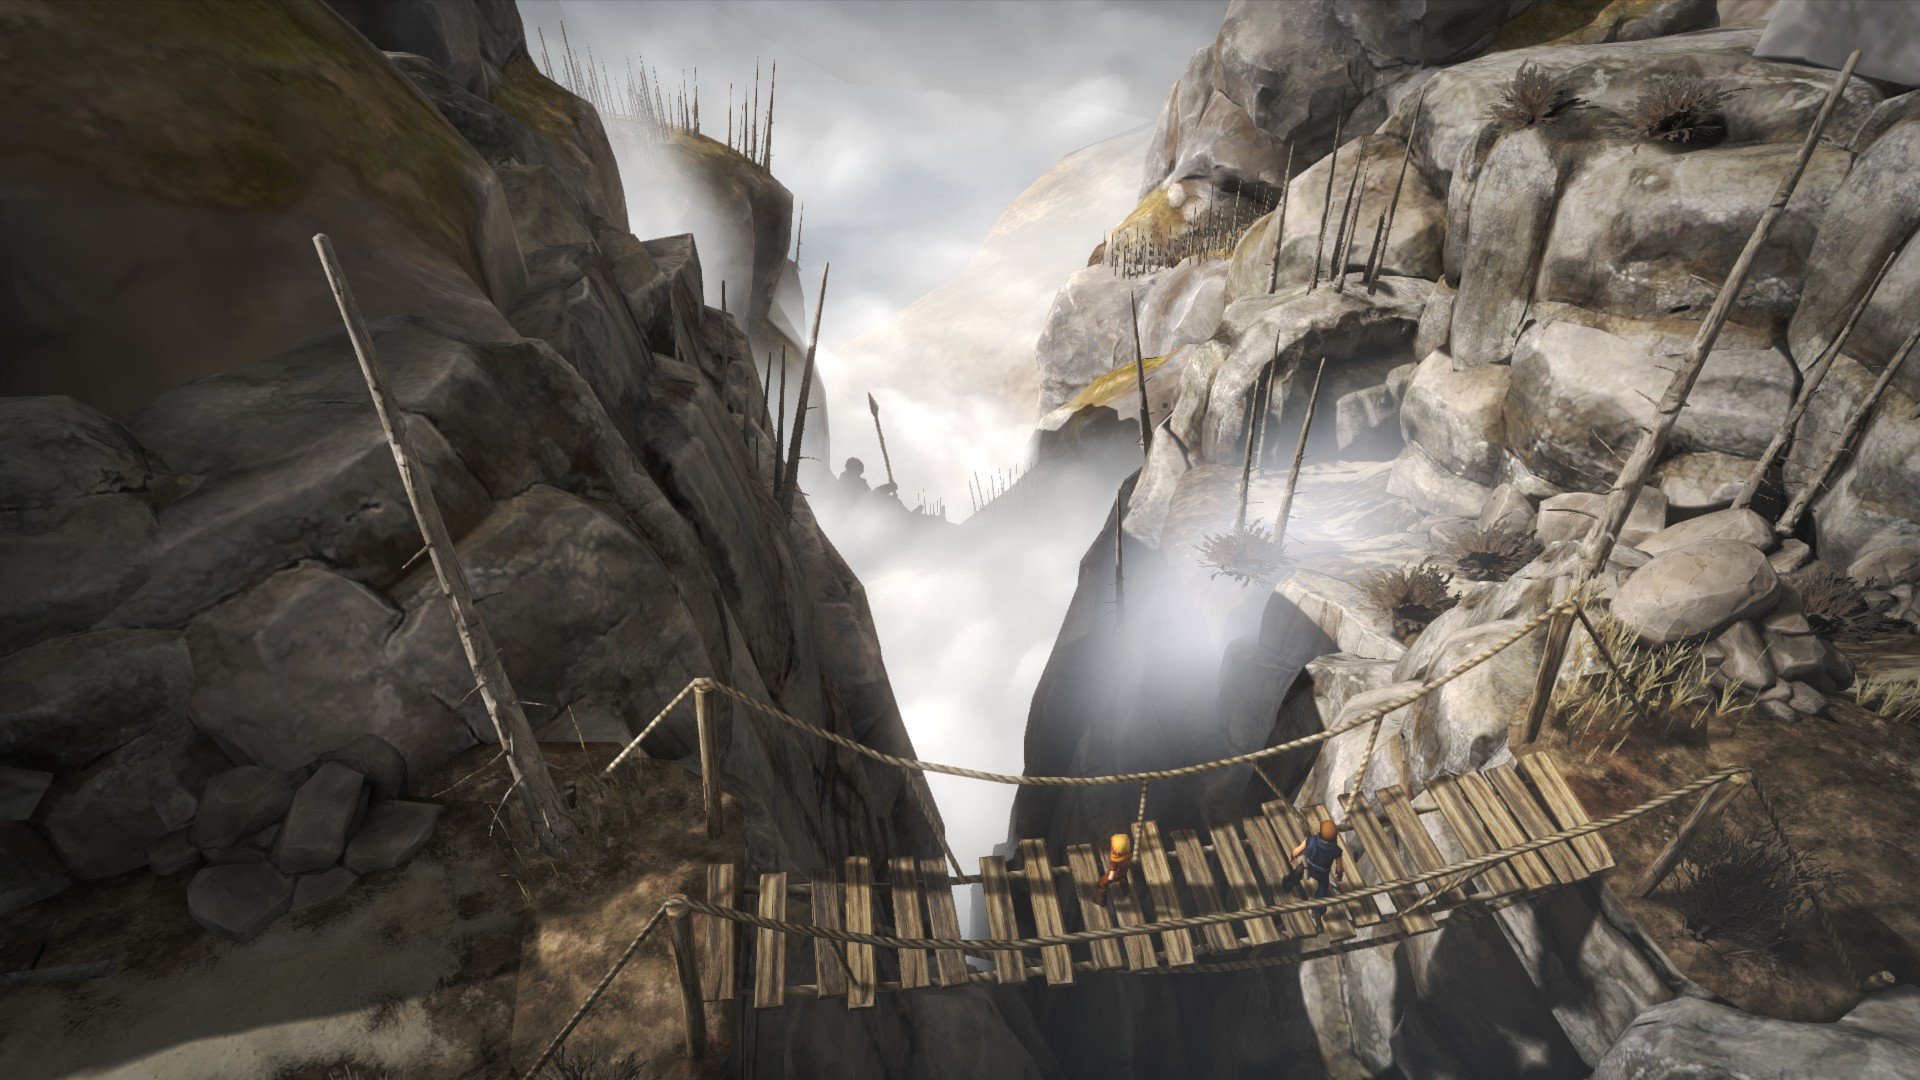 Brothers two sons на двоих. Brothers: a Tale of two sons. Brothers: a Tale of two sons (2013). Brothers a Tale of two sons диск. Brothers: a Tale of two sons (2013) игры.